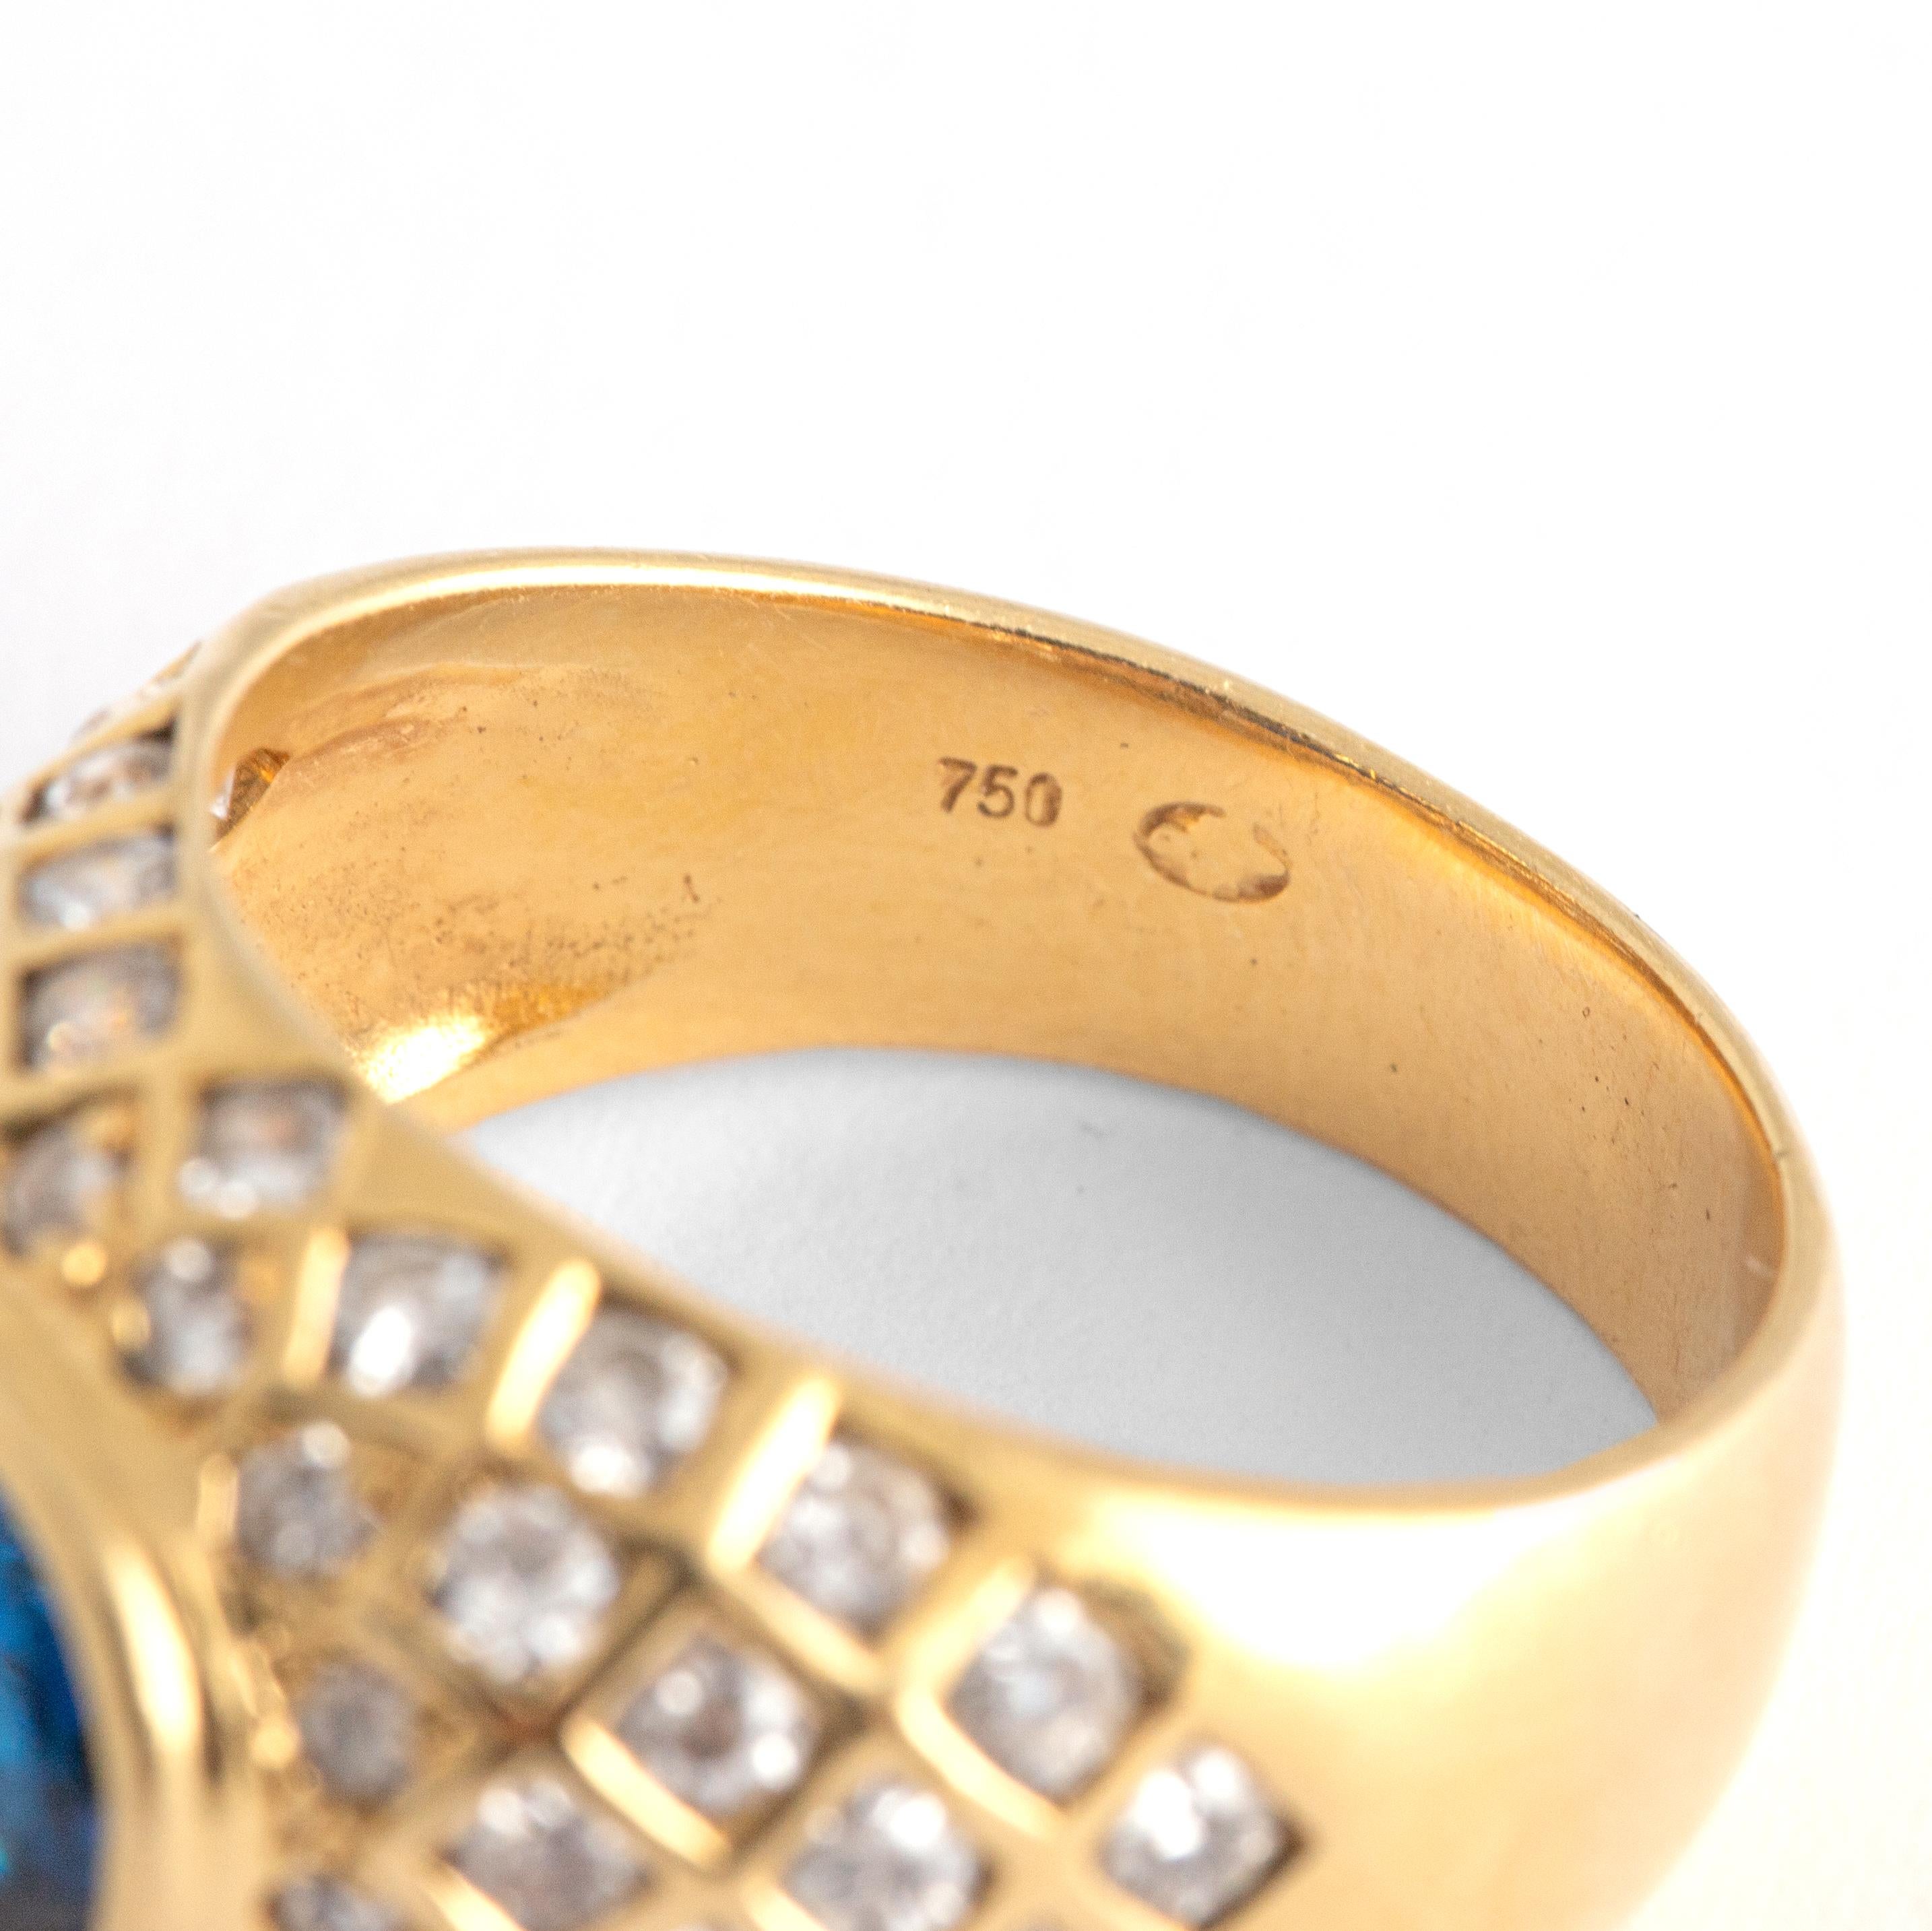 Diamond Yellow Gold 18K Ring centered by a blue stone not tested. Probably synthetic Sapphire.
Size: 54
Total weight: 8.65 grams.
